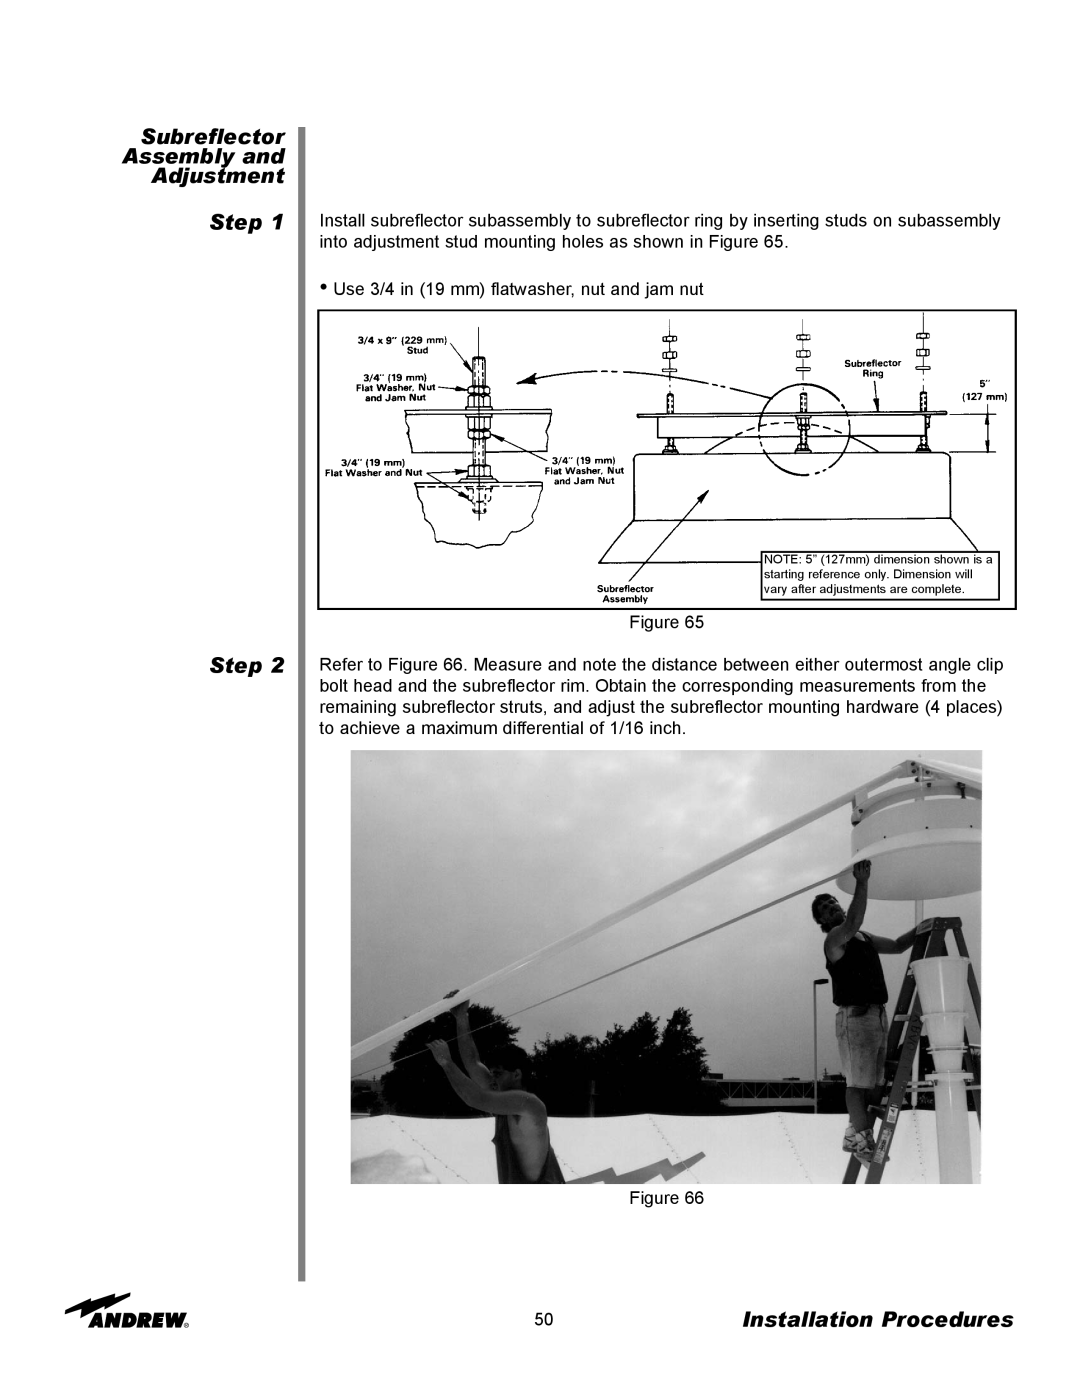 Andrew ES73 manual Subreflector Assembly and Adjustment Step Step, Installation Procedures 